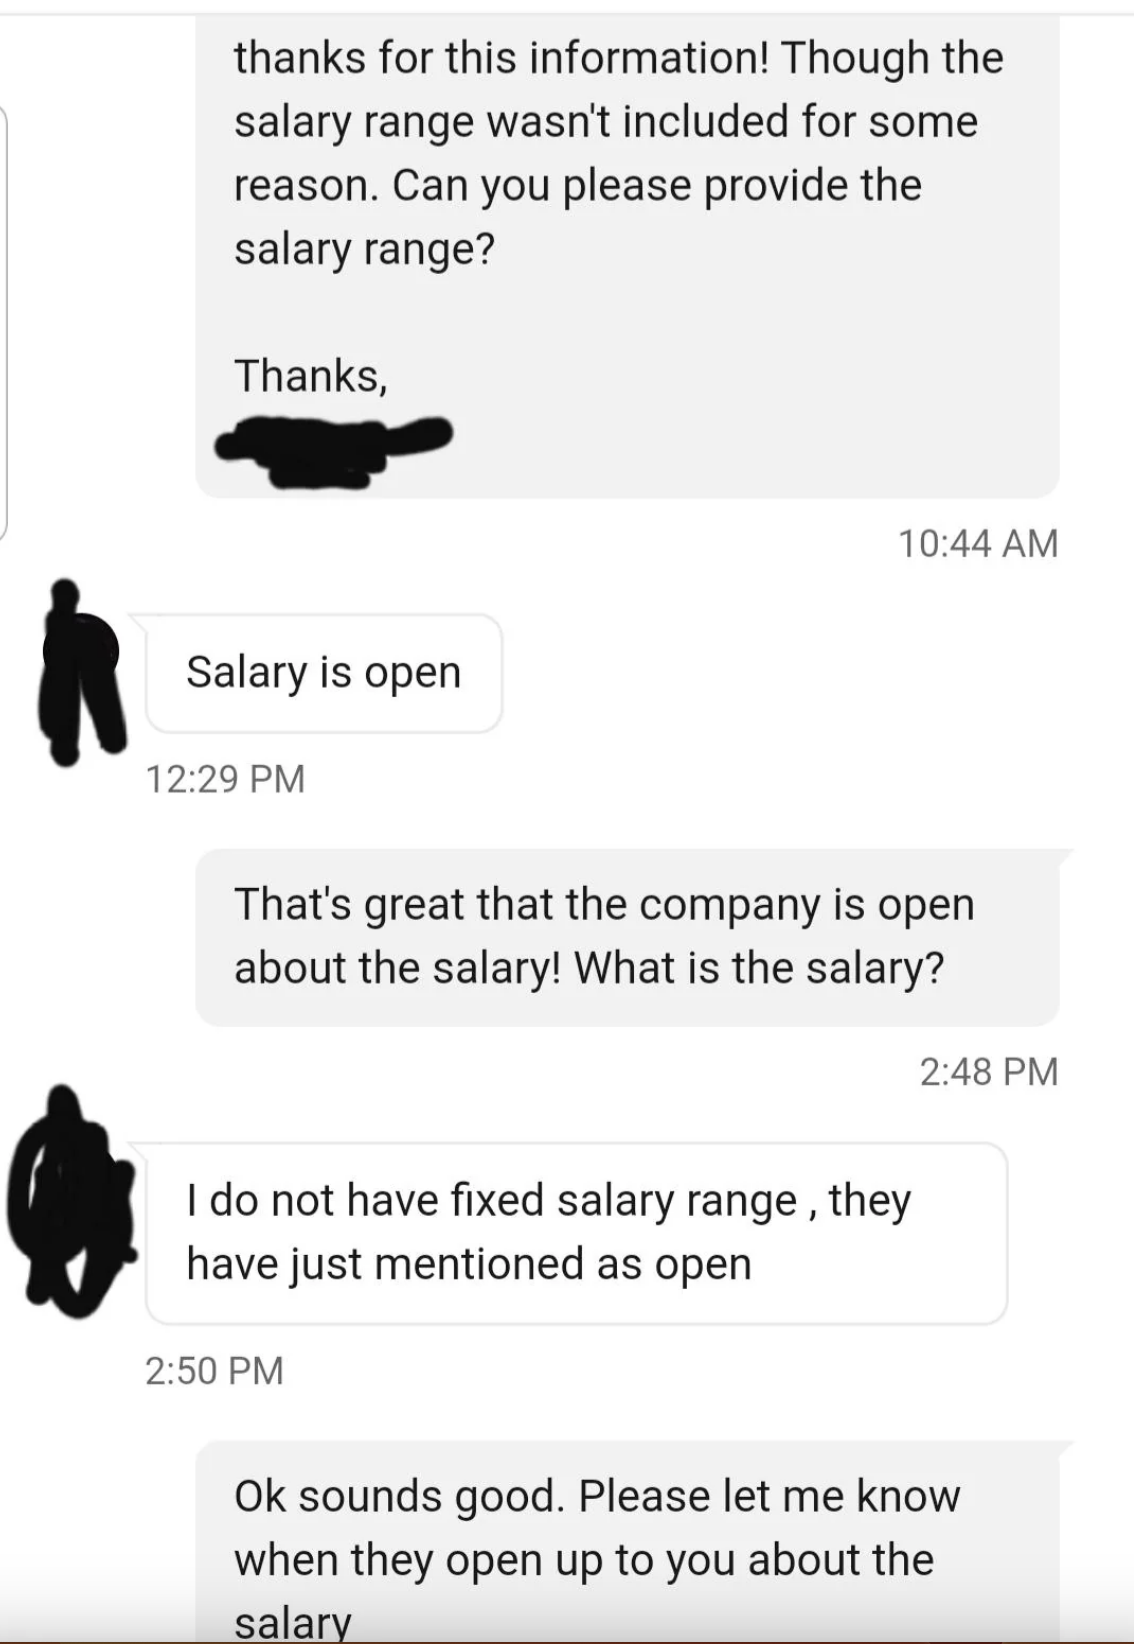 &quot;I do not have fixed salary range, they have just mentioned as open&quot;